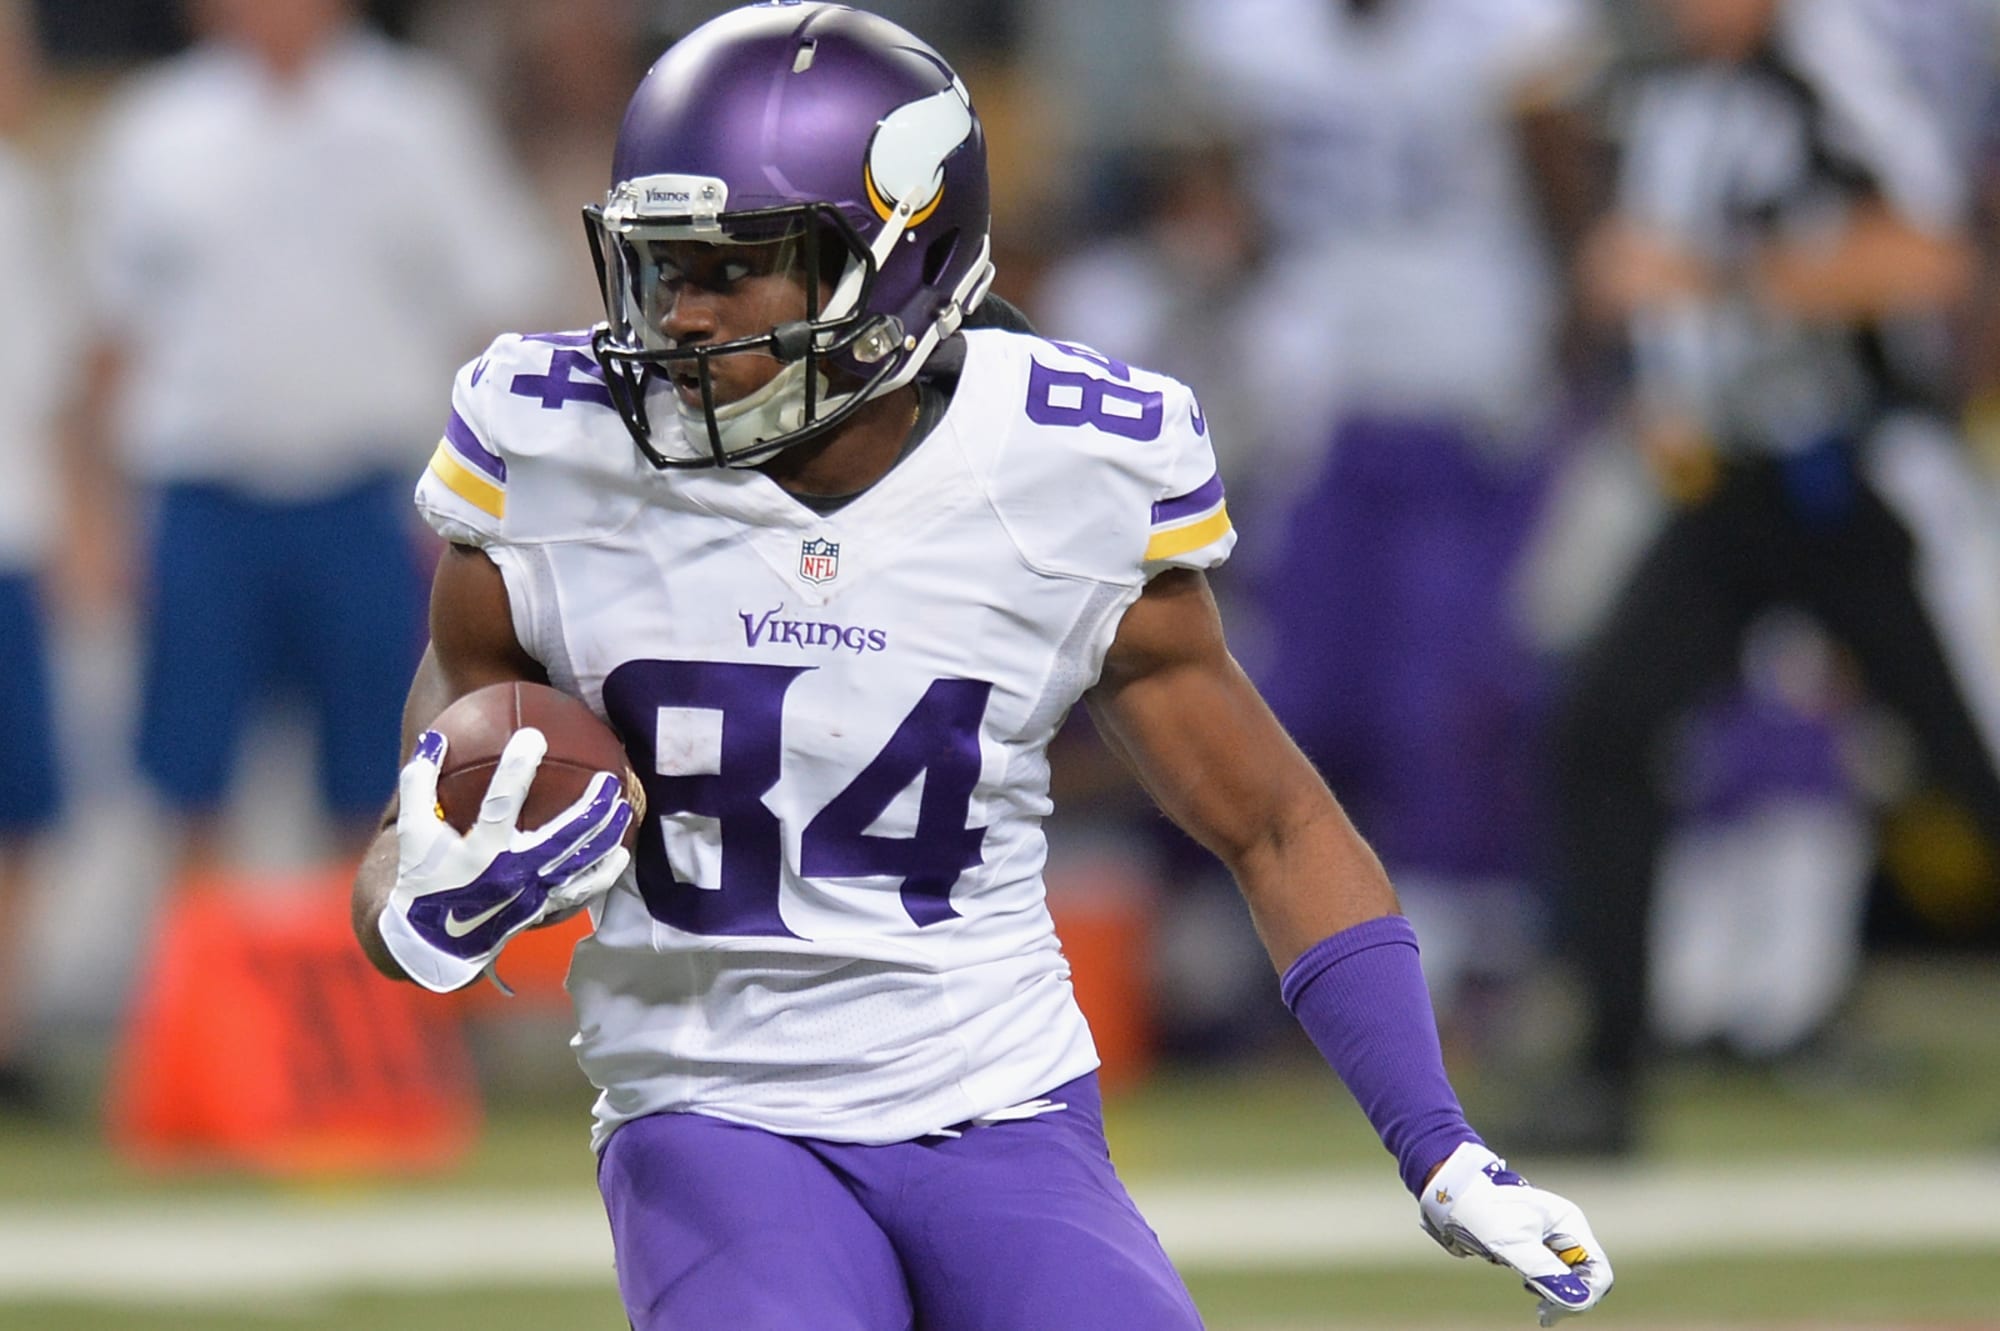 Should Cordarrelle Patterson be regarded as a failed Vikings draft pick?